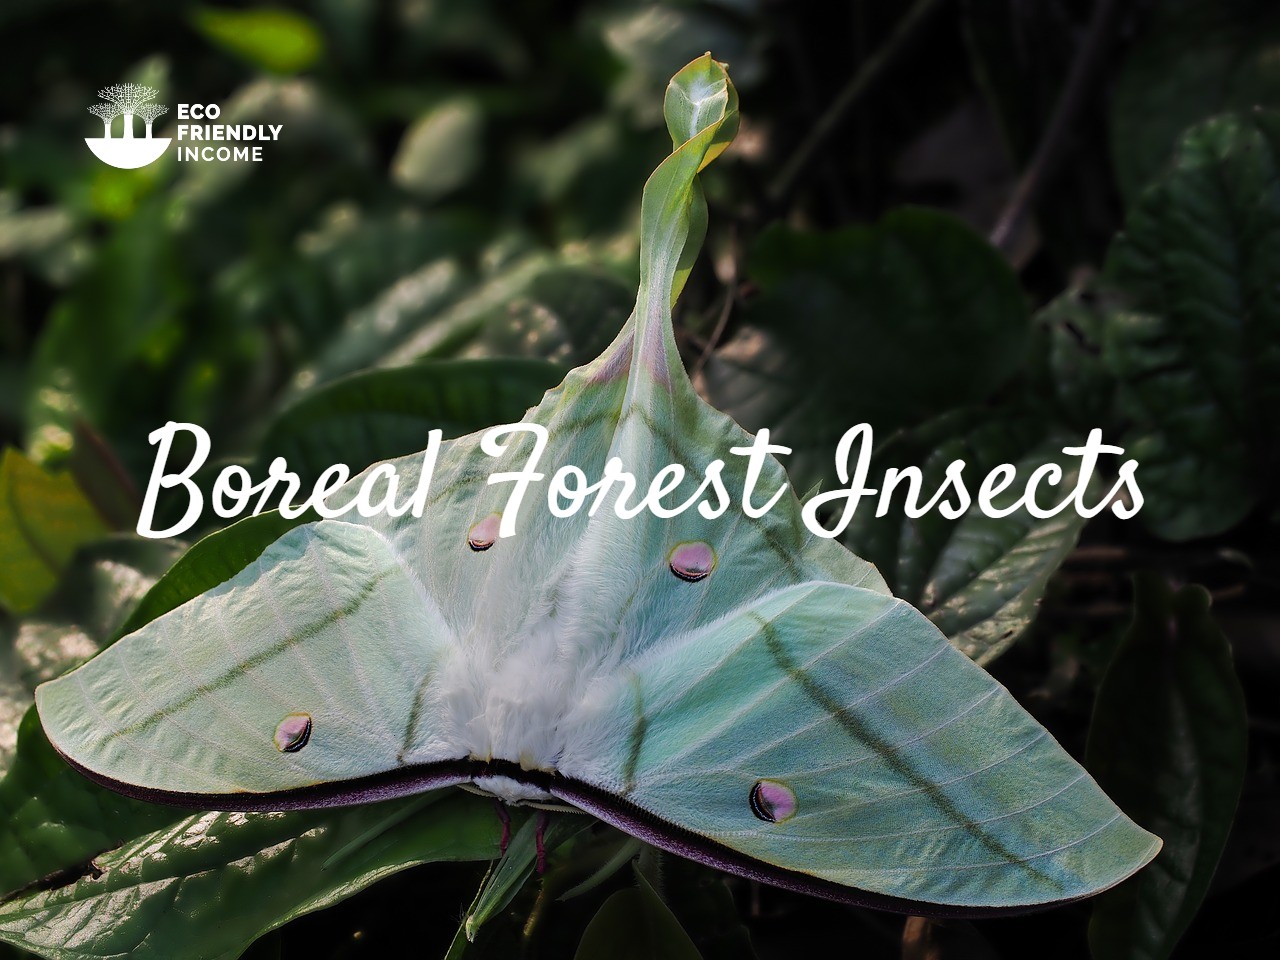 Boreal Forest Insects